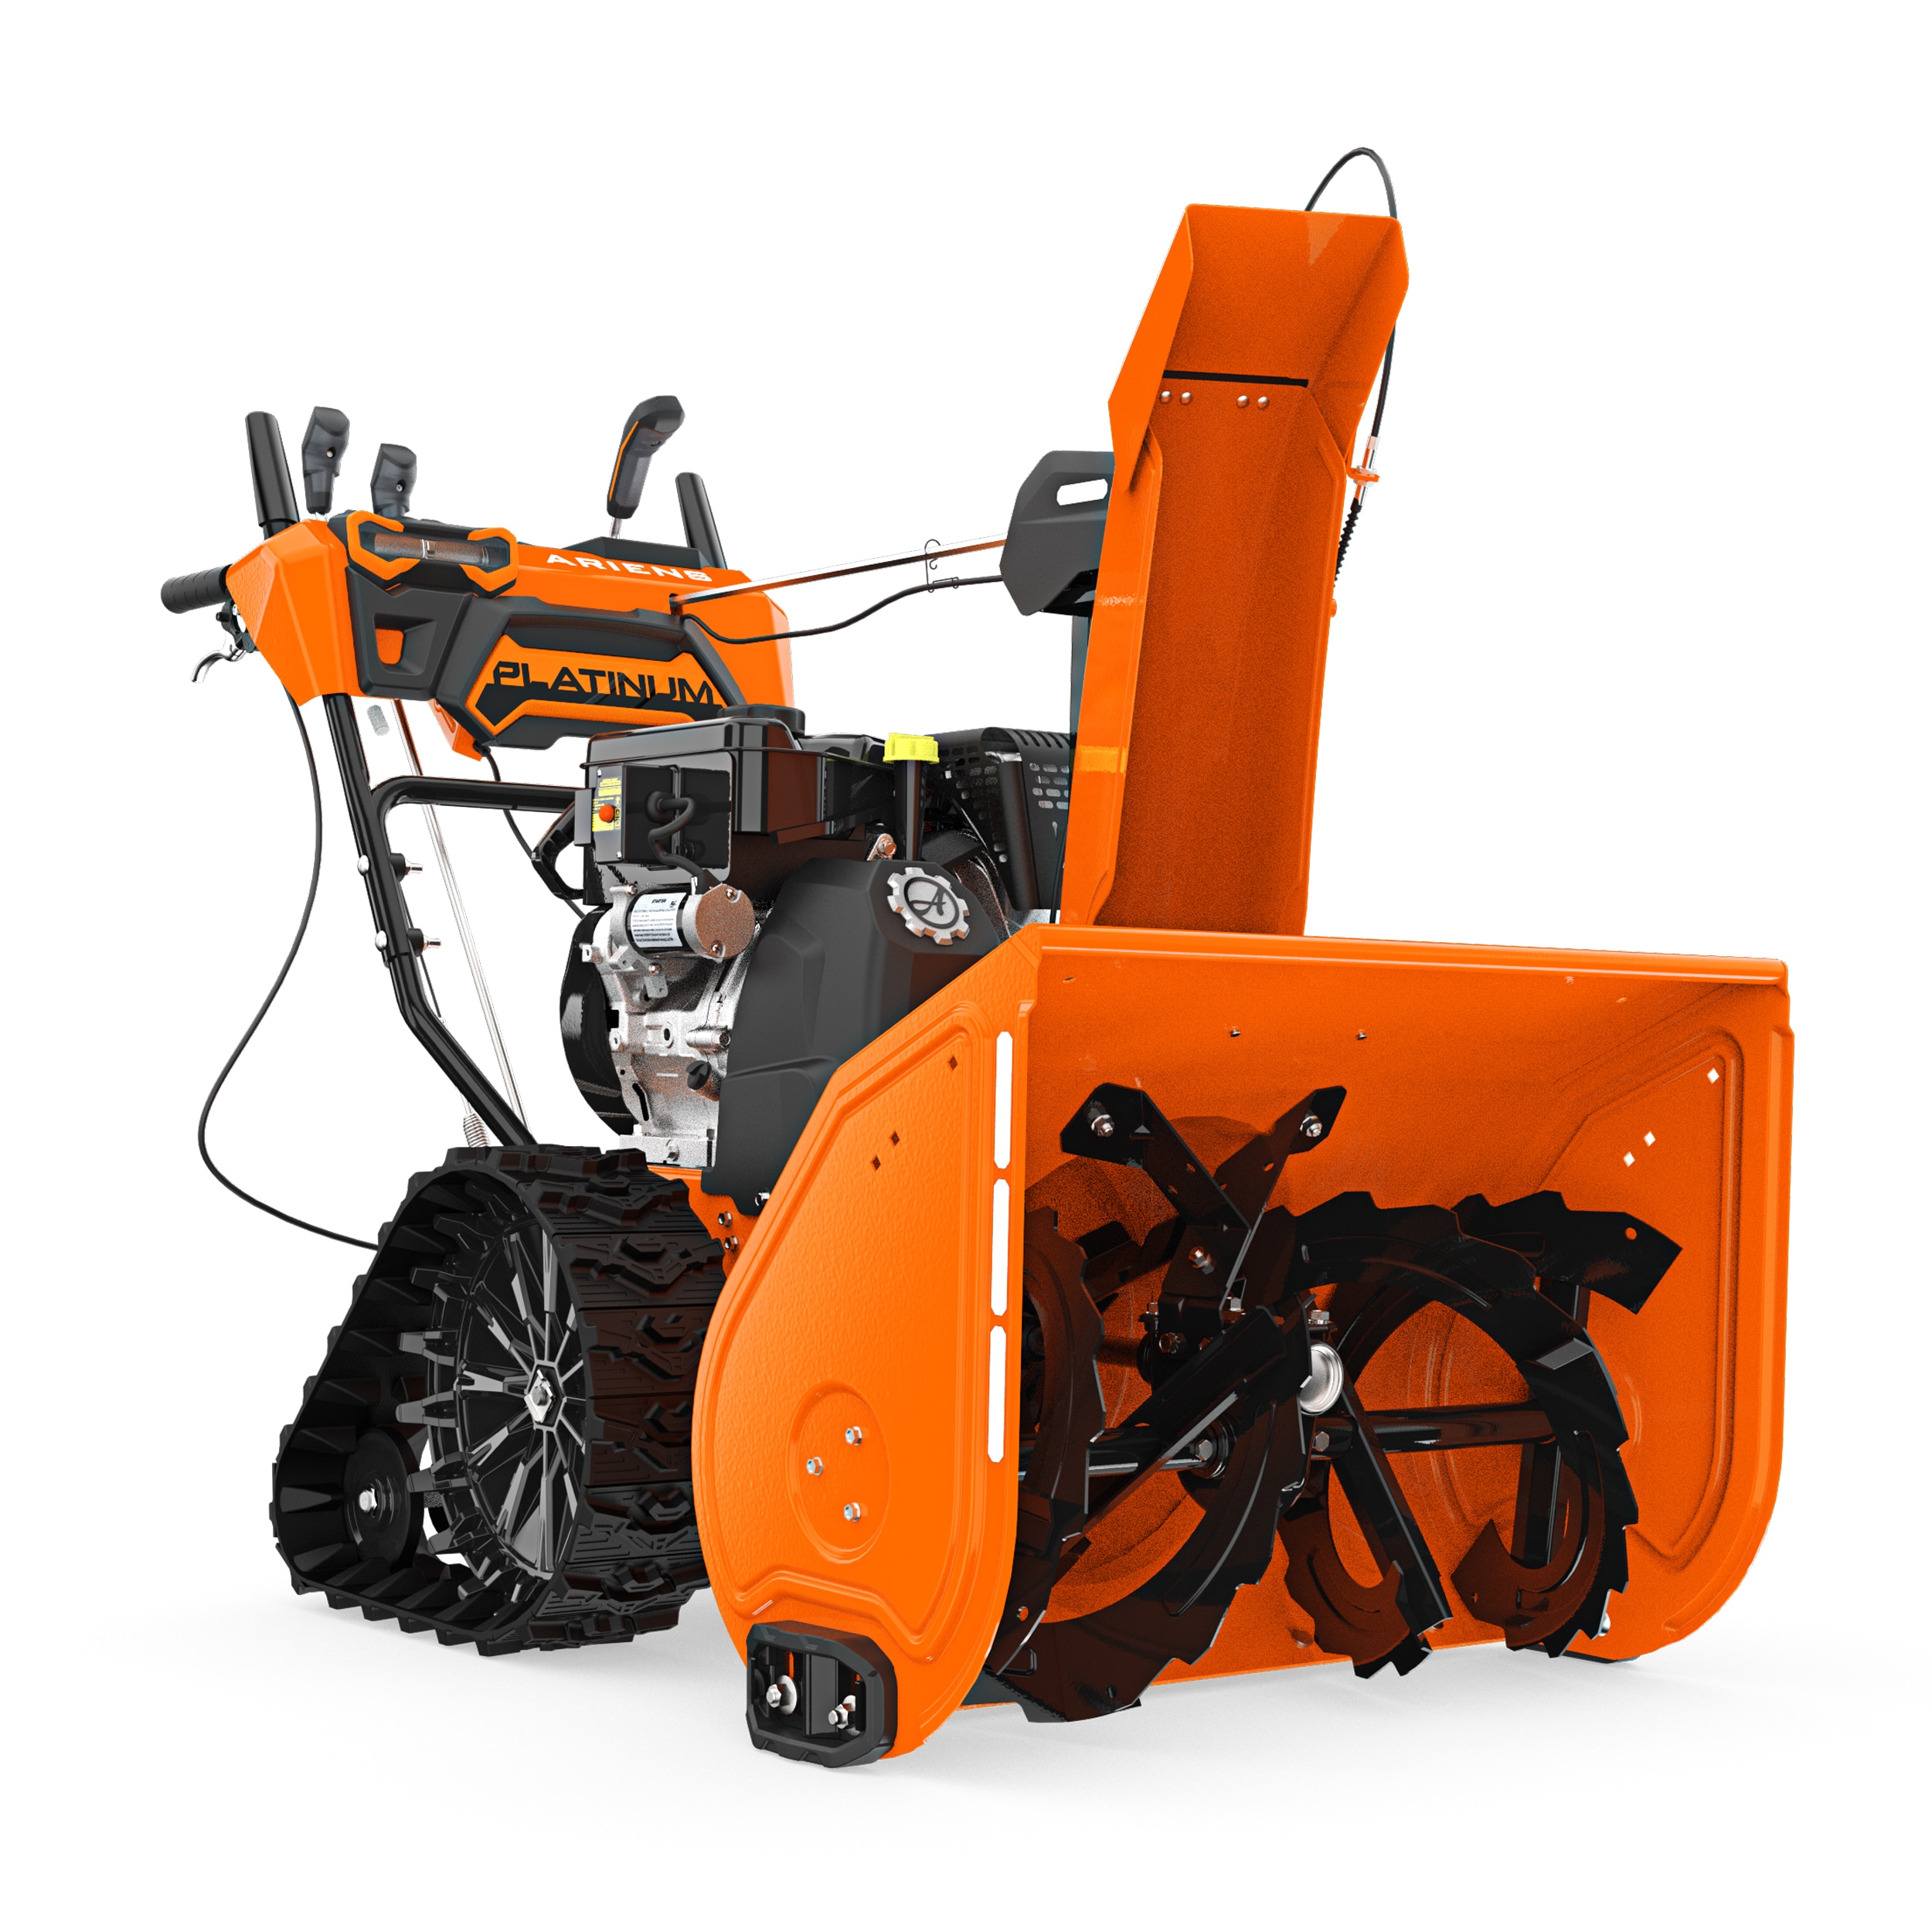 How to Easily Drain Gas from Ariens Snowblower: Quick Guide.